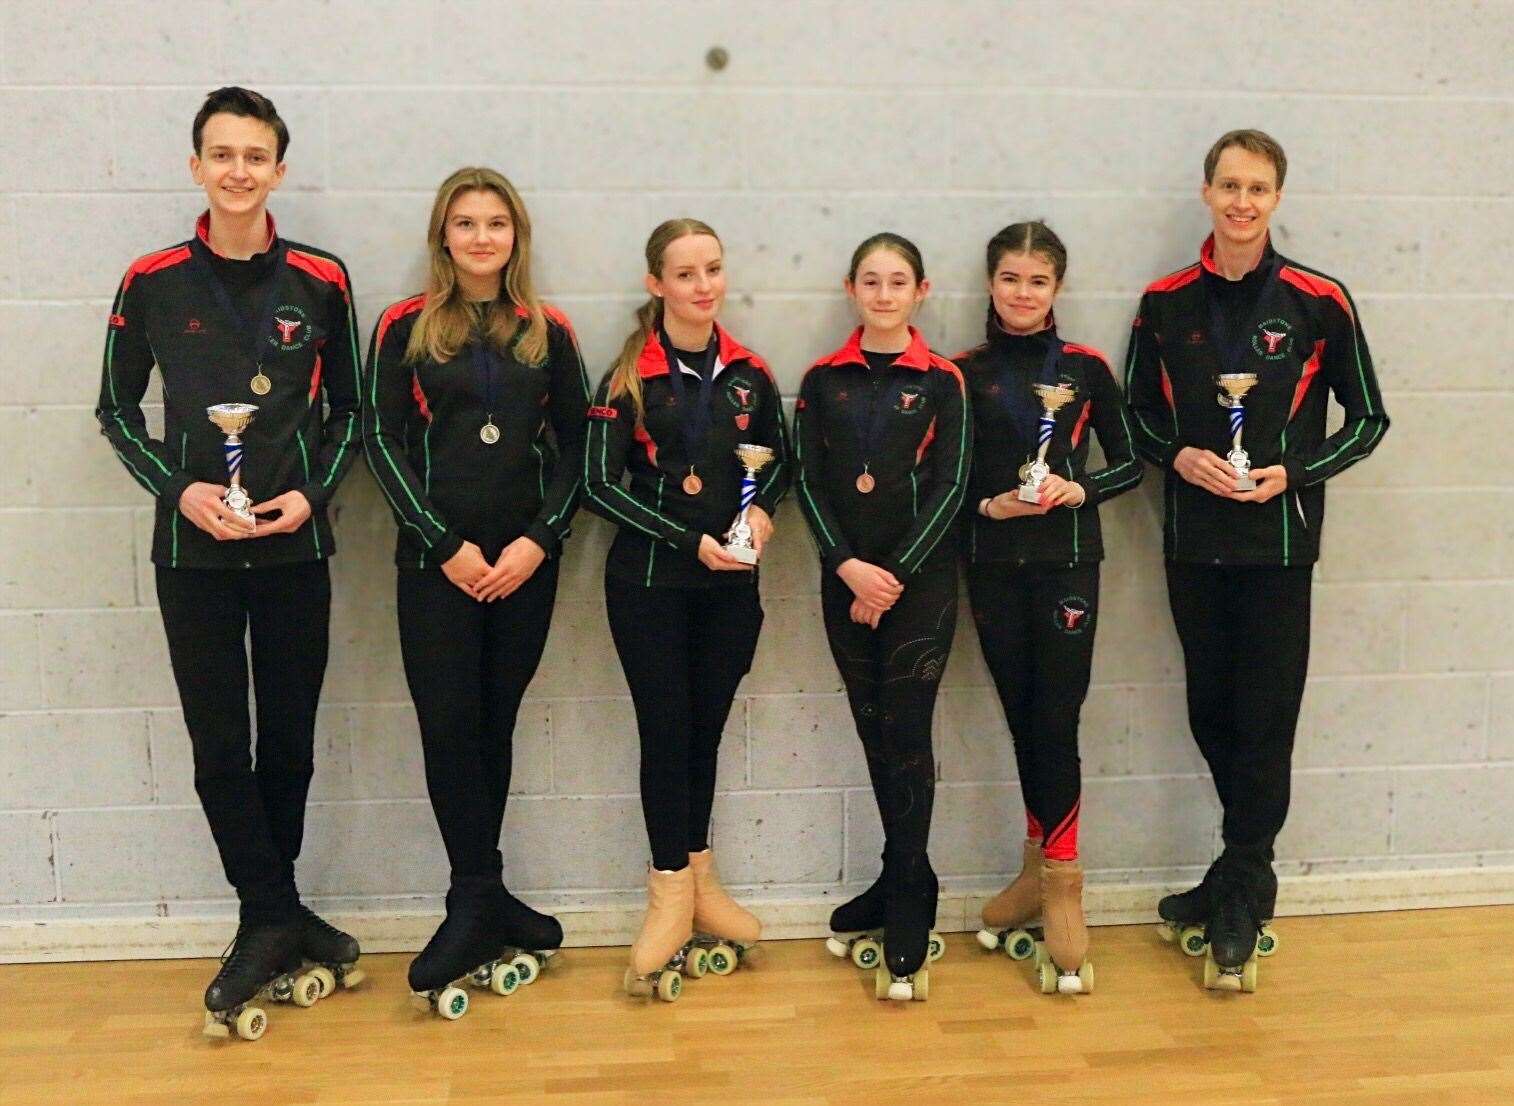 Maidstone Roller Dance Club's GBSA winners at Great Yarmouth